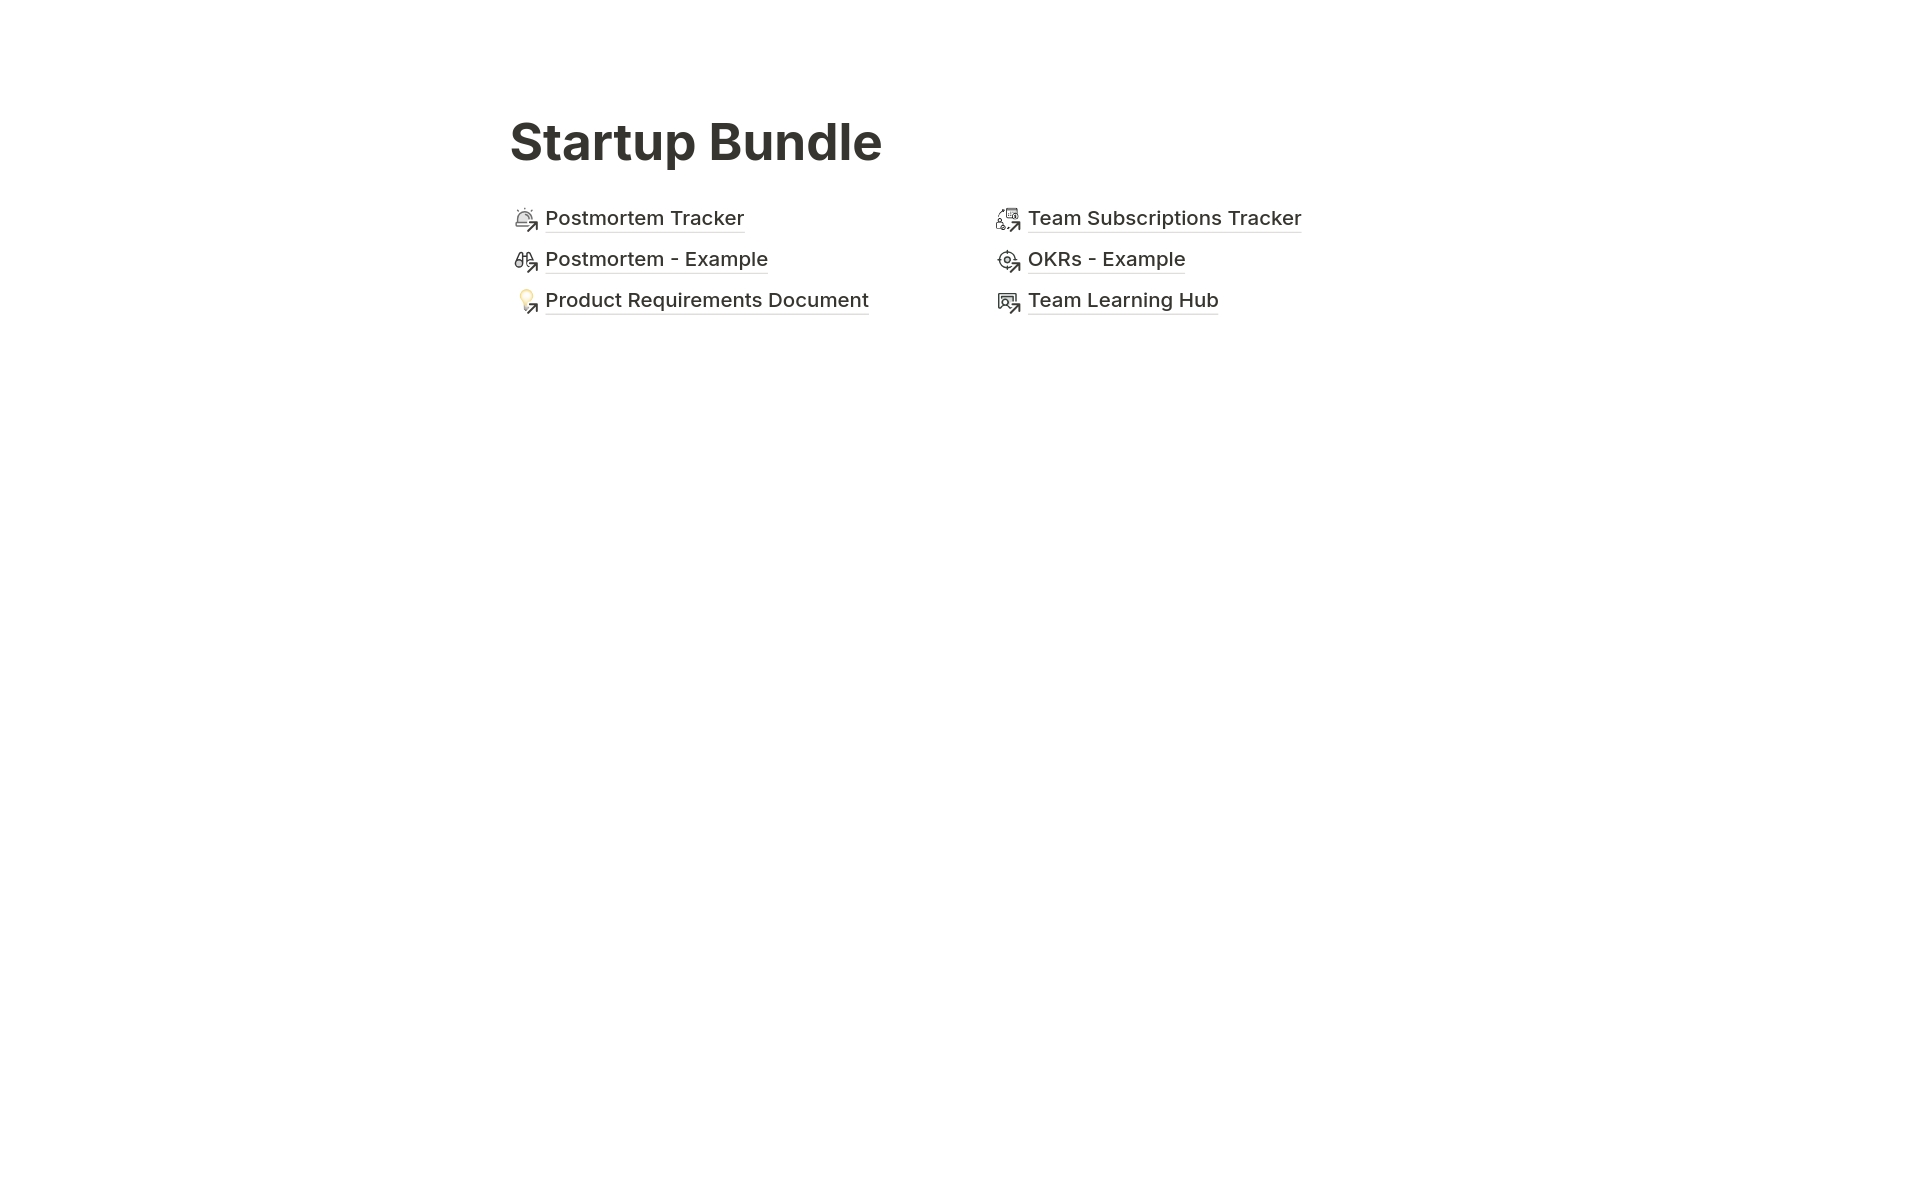 Supercharge your startup with 6 Notion templates at 50% off! PRD, OKRs, Team Learning Hub, and more. Boost efficiency, streamline processes, and foster growth.

Includes lifetime updates and future templates.

$50 value for just $25.

Transform your startup operations today!